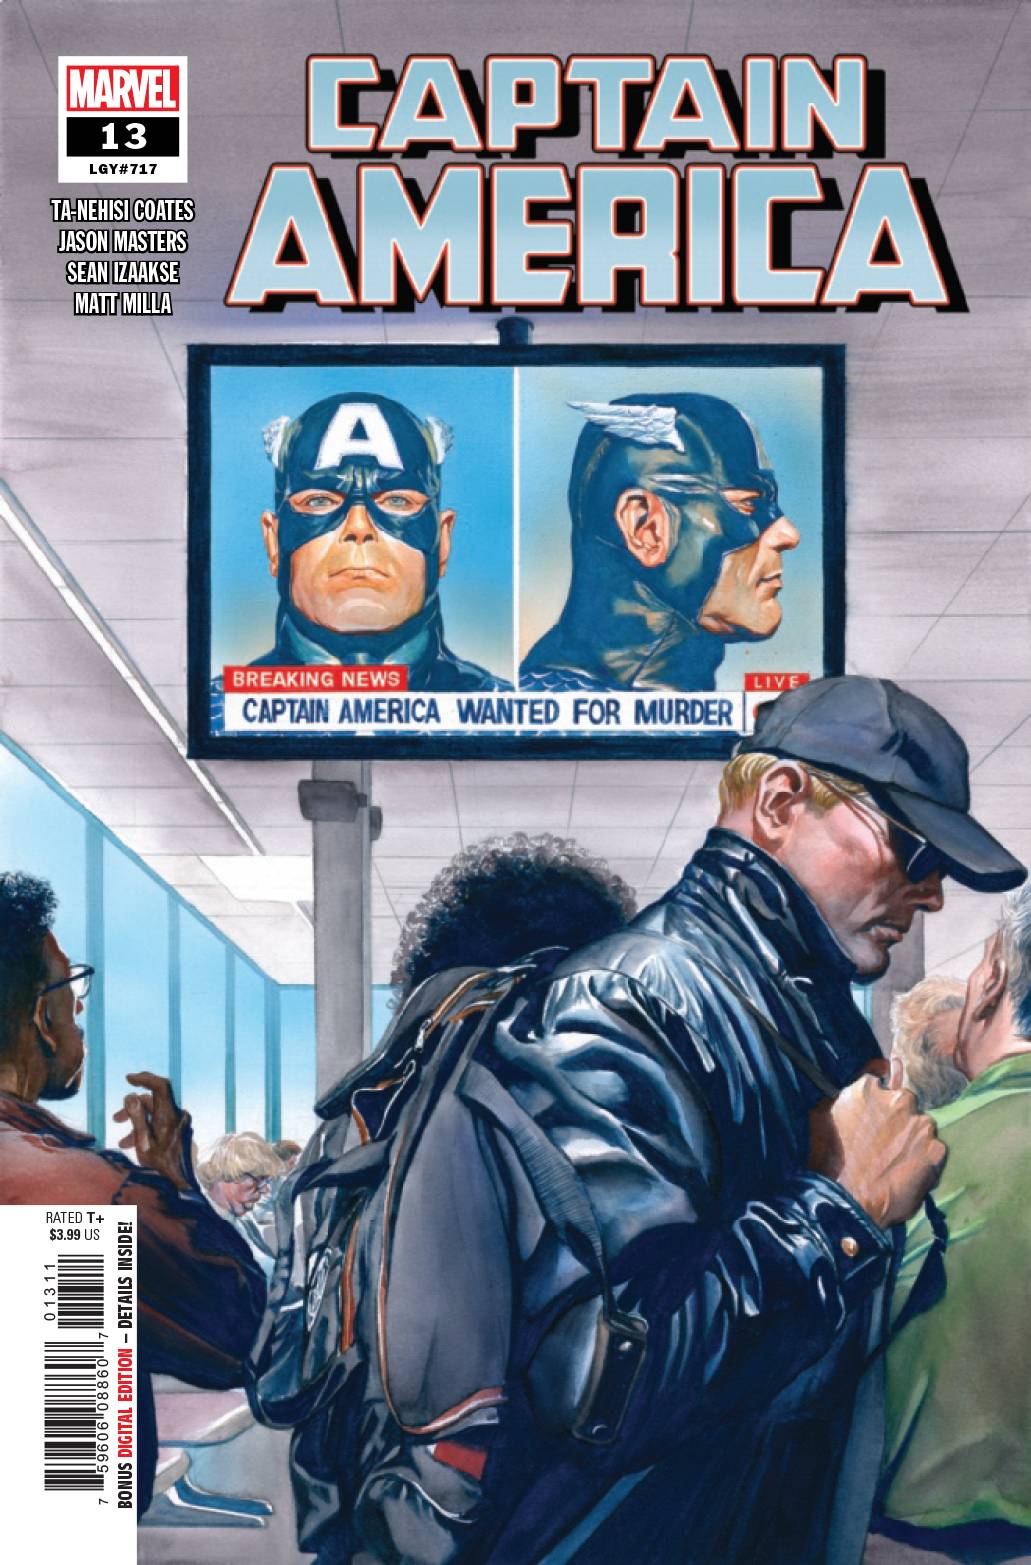 Photo of Captain America Issue 13 comic sold by Stronghold Collectibles